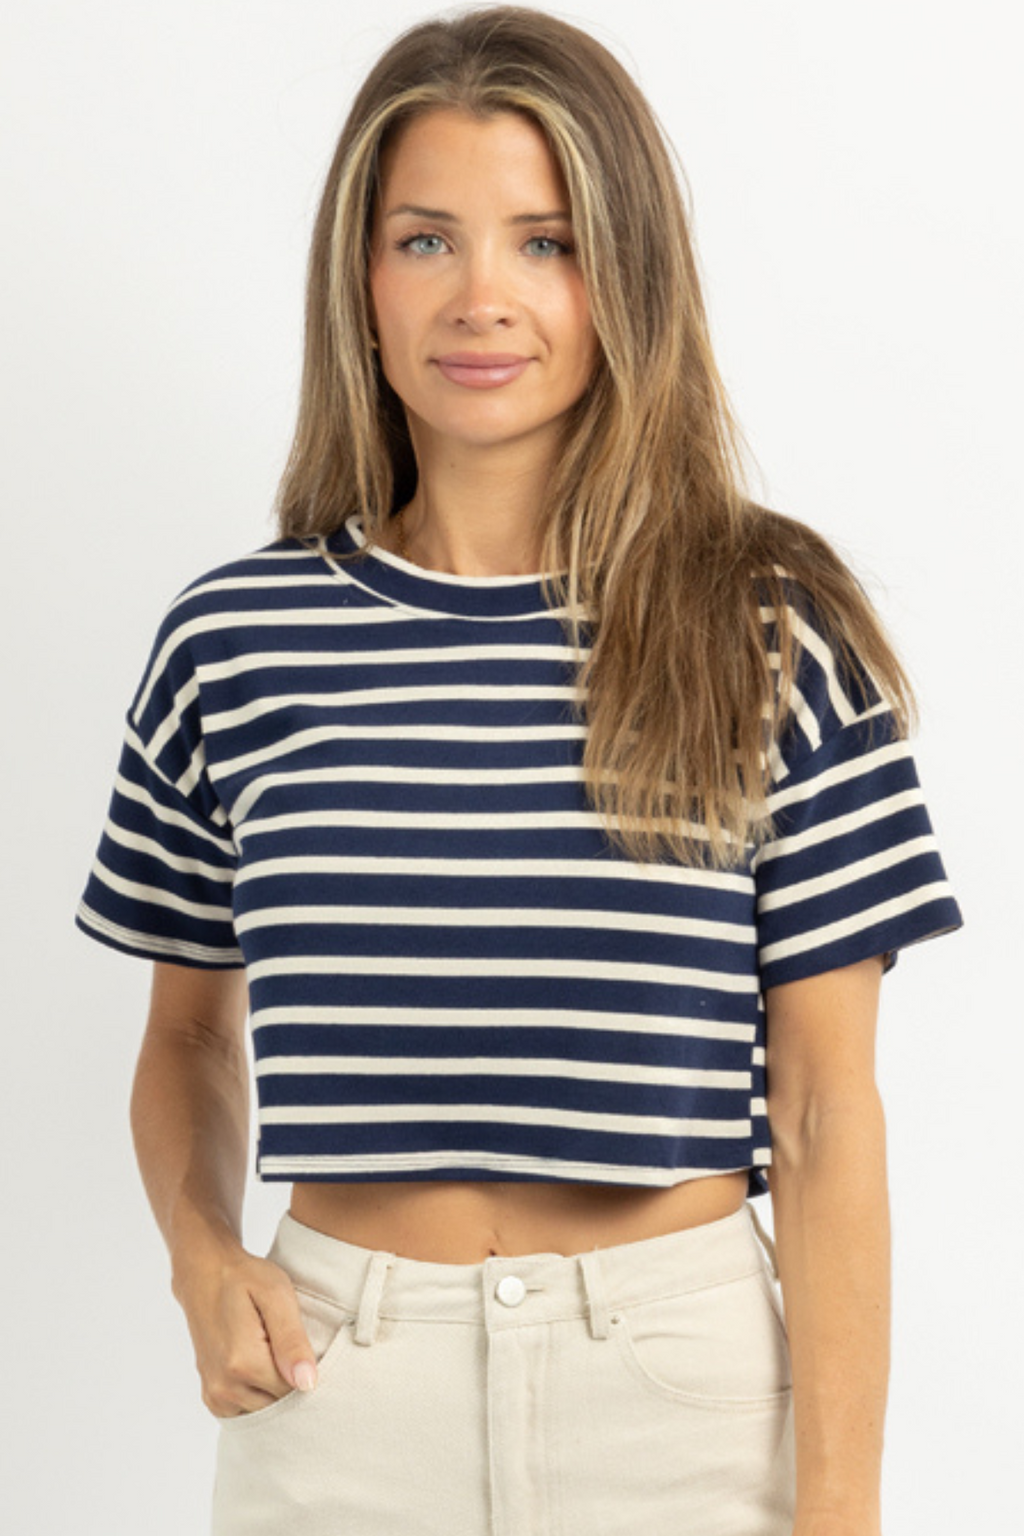 SPOTTED IN STRIPES NAVY TOP